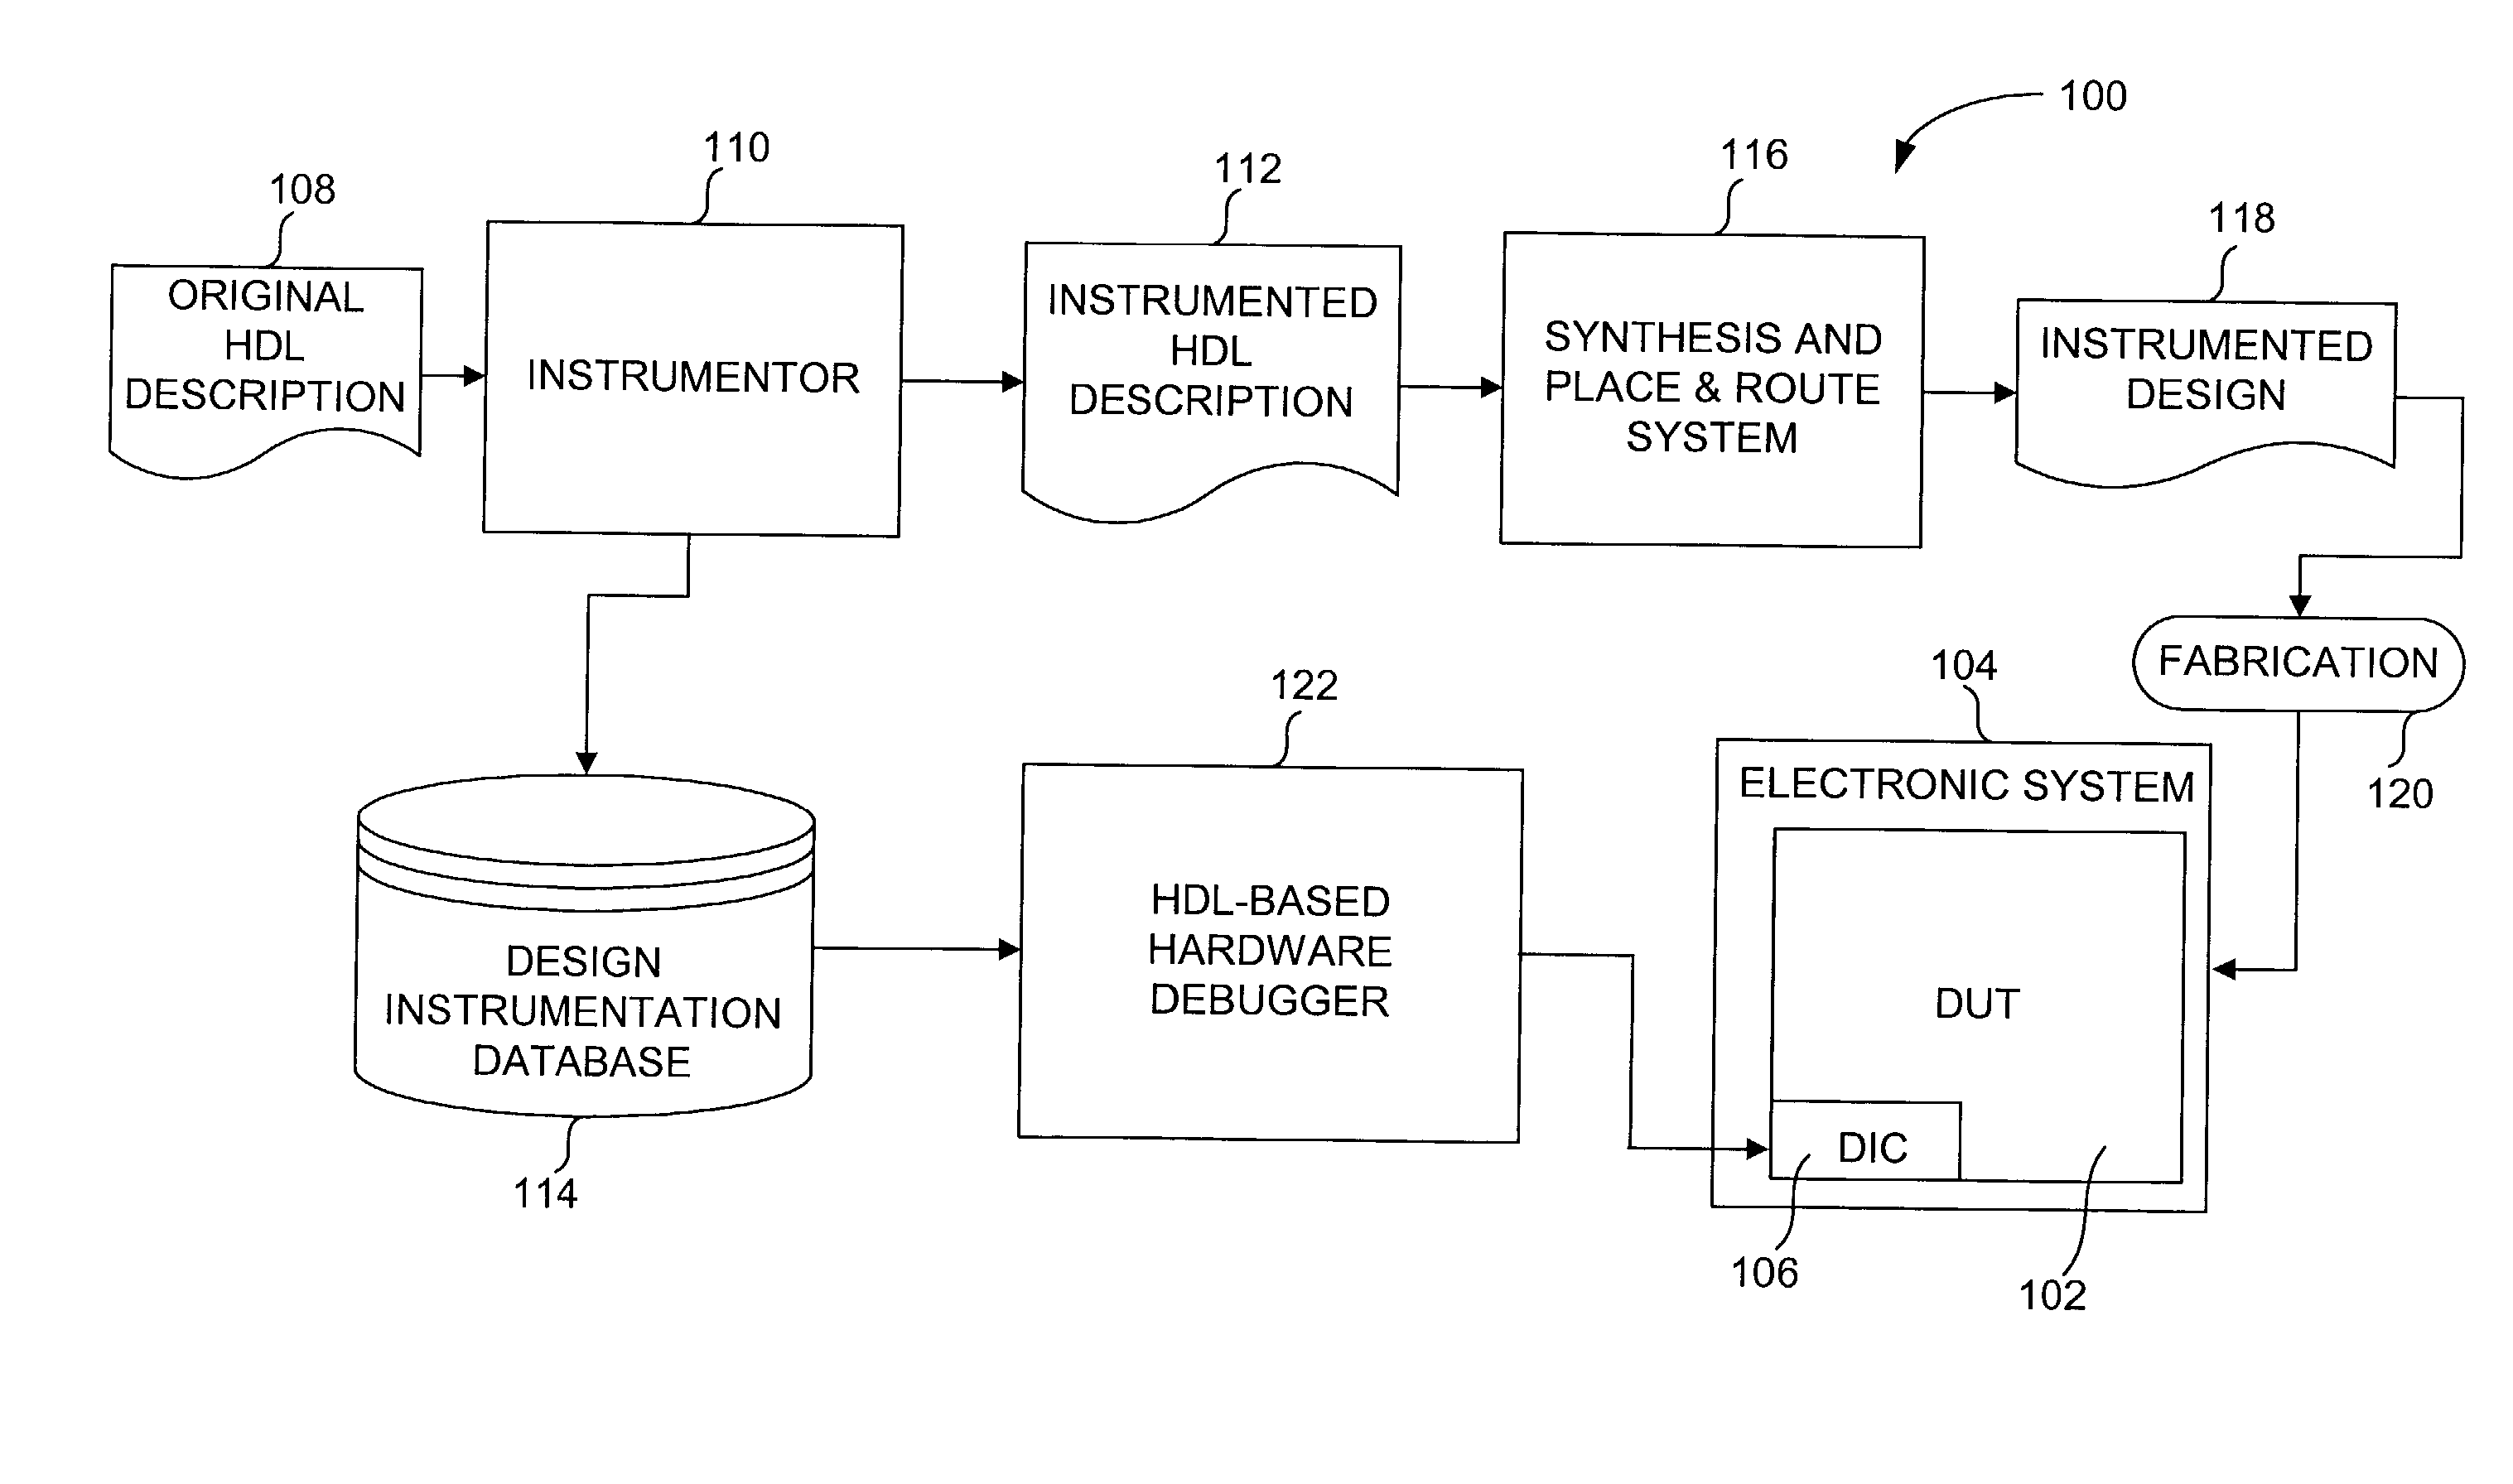 Method and system for debugging an electronic system using instrumentation circuitry and a logic analyzer